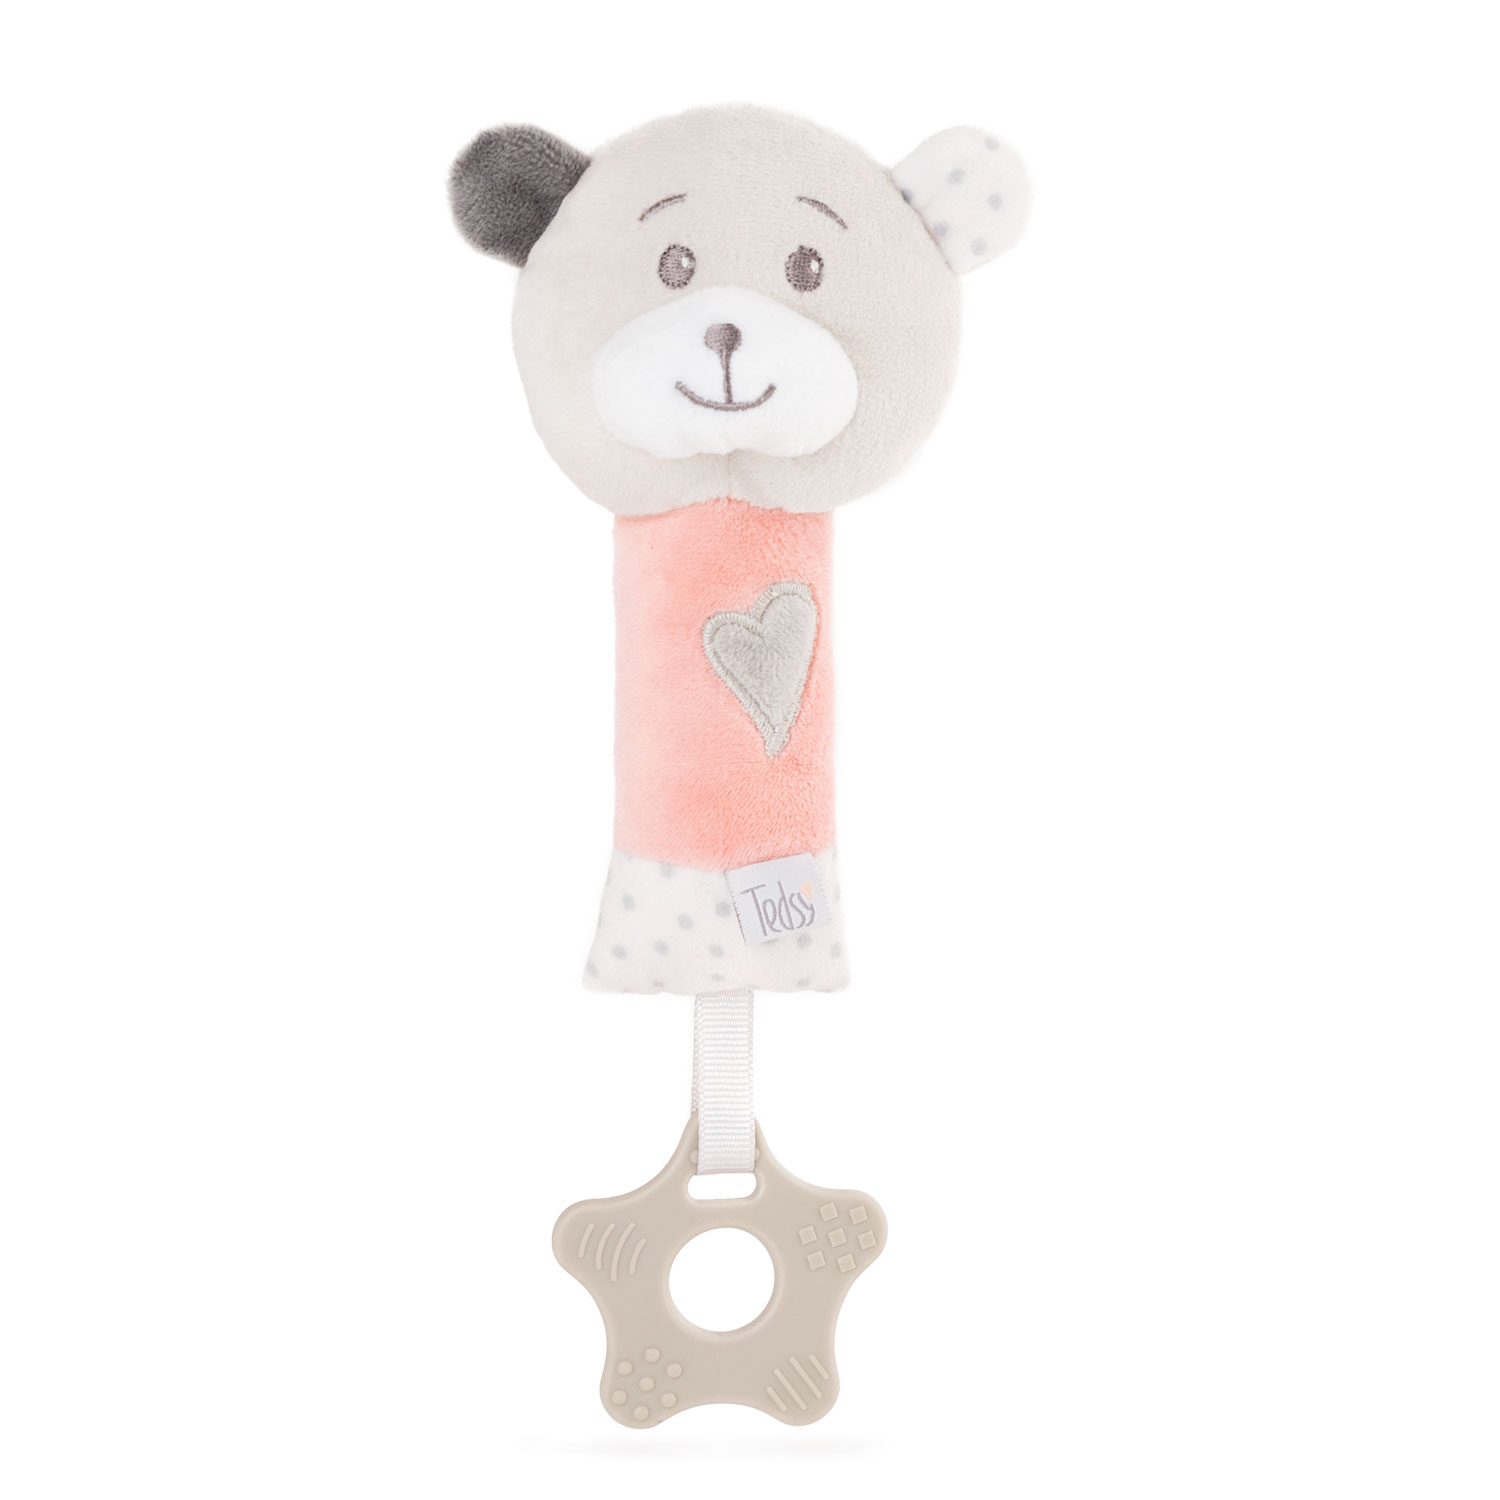 Baby holder with bear - Pink